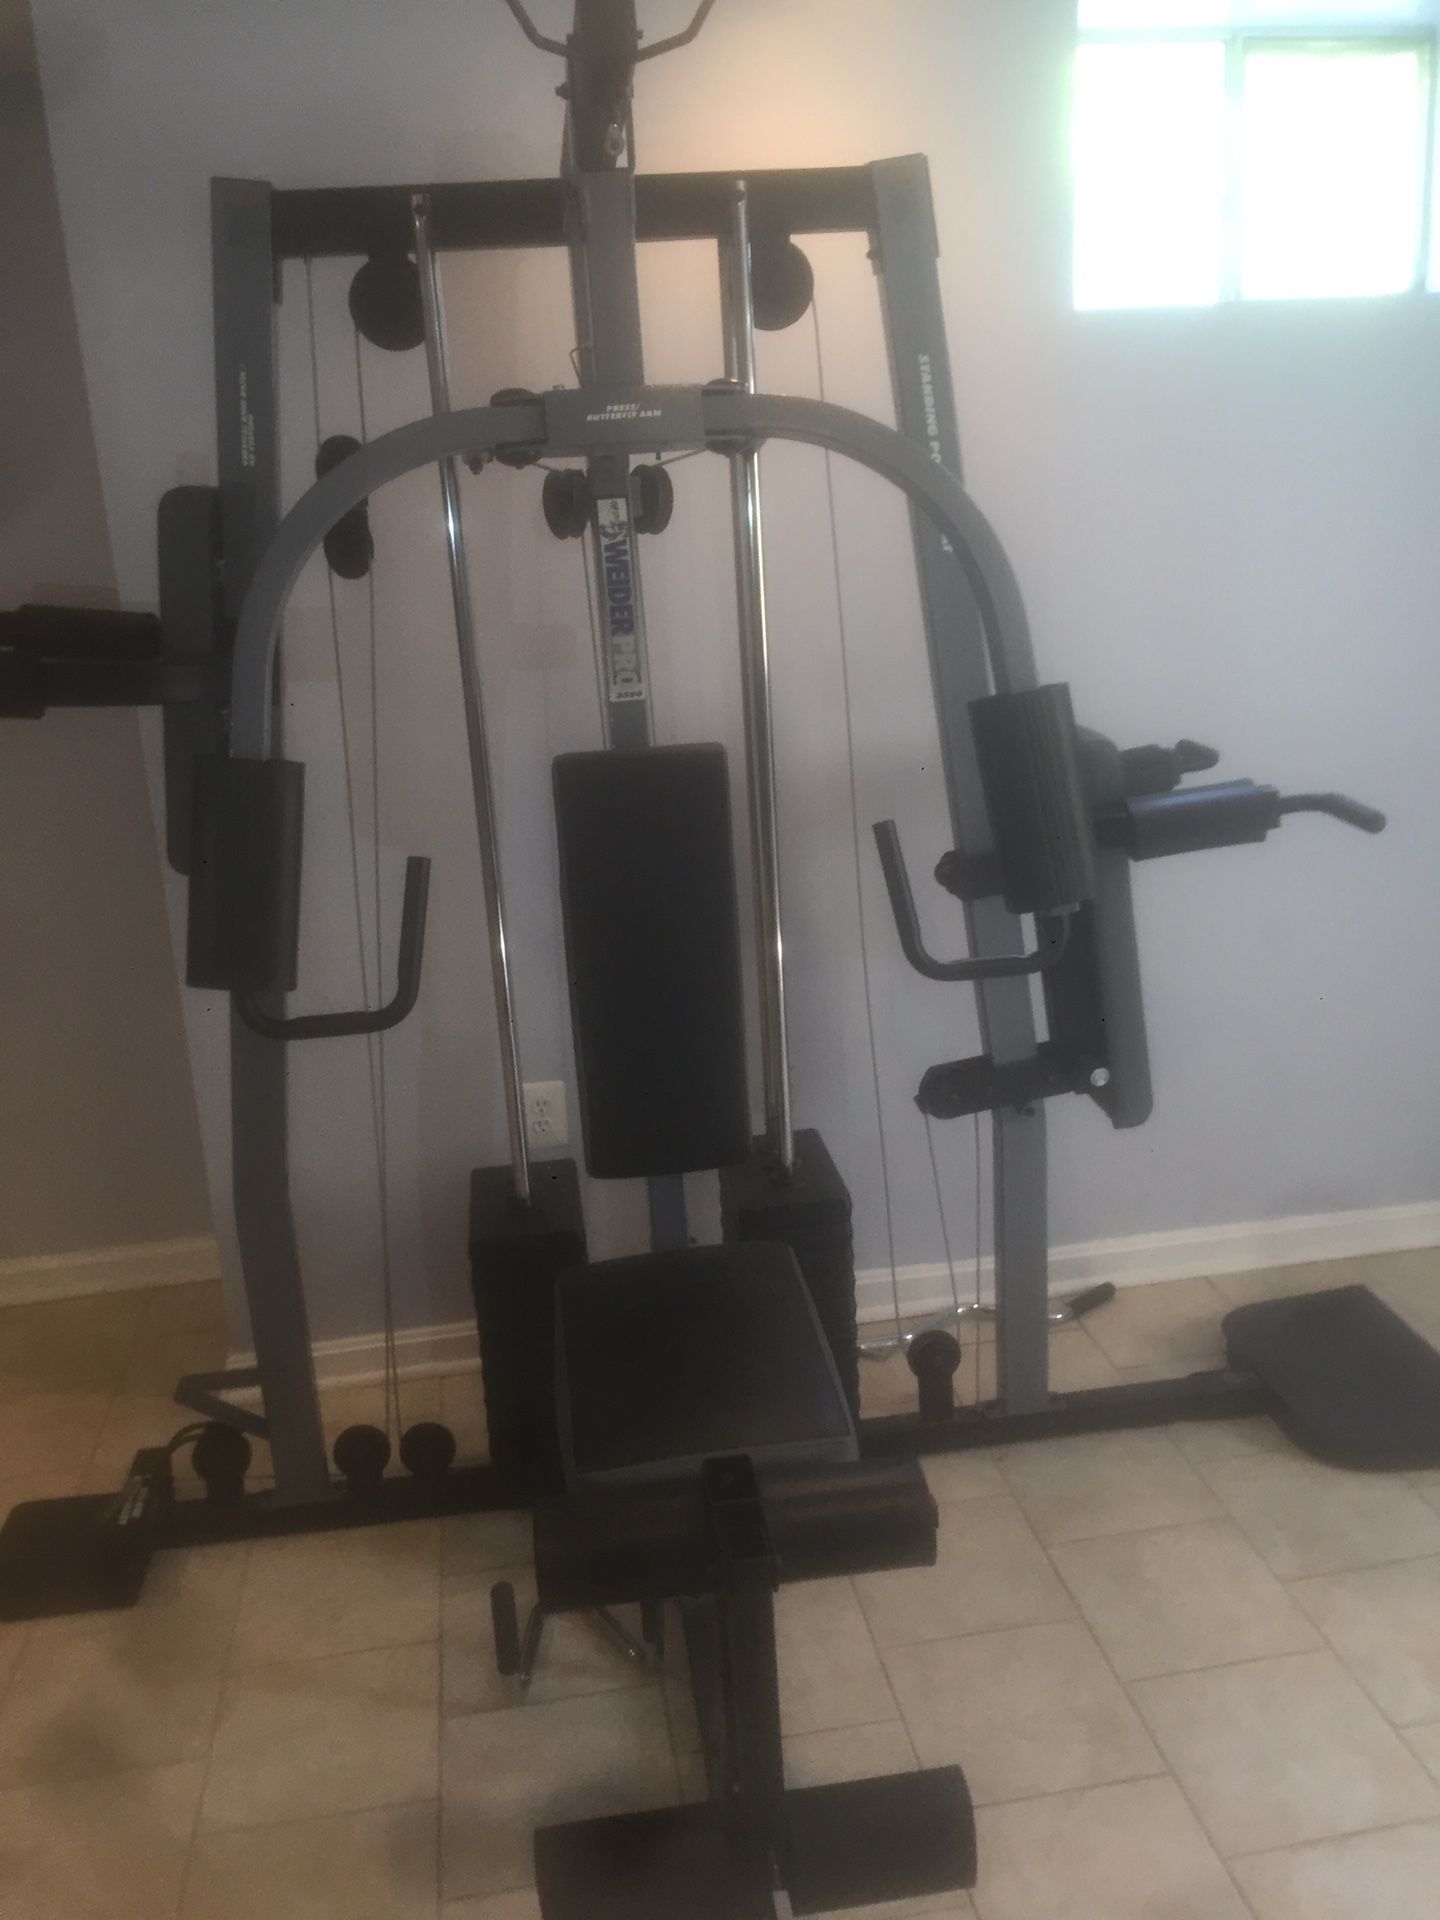 Full work out machine